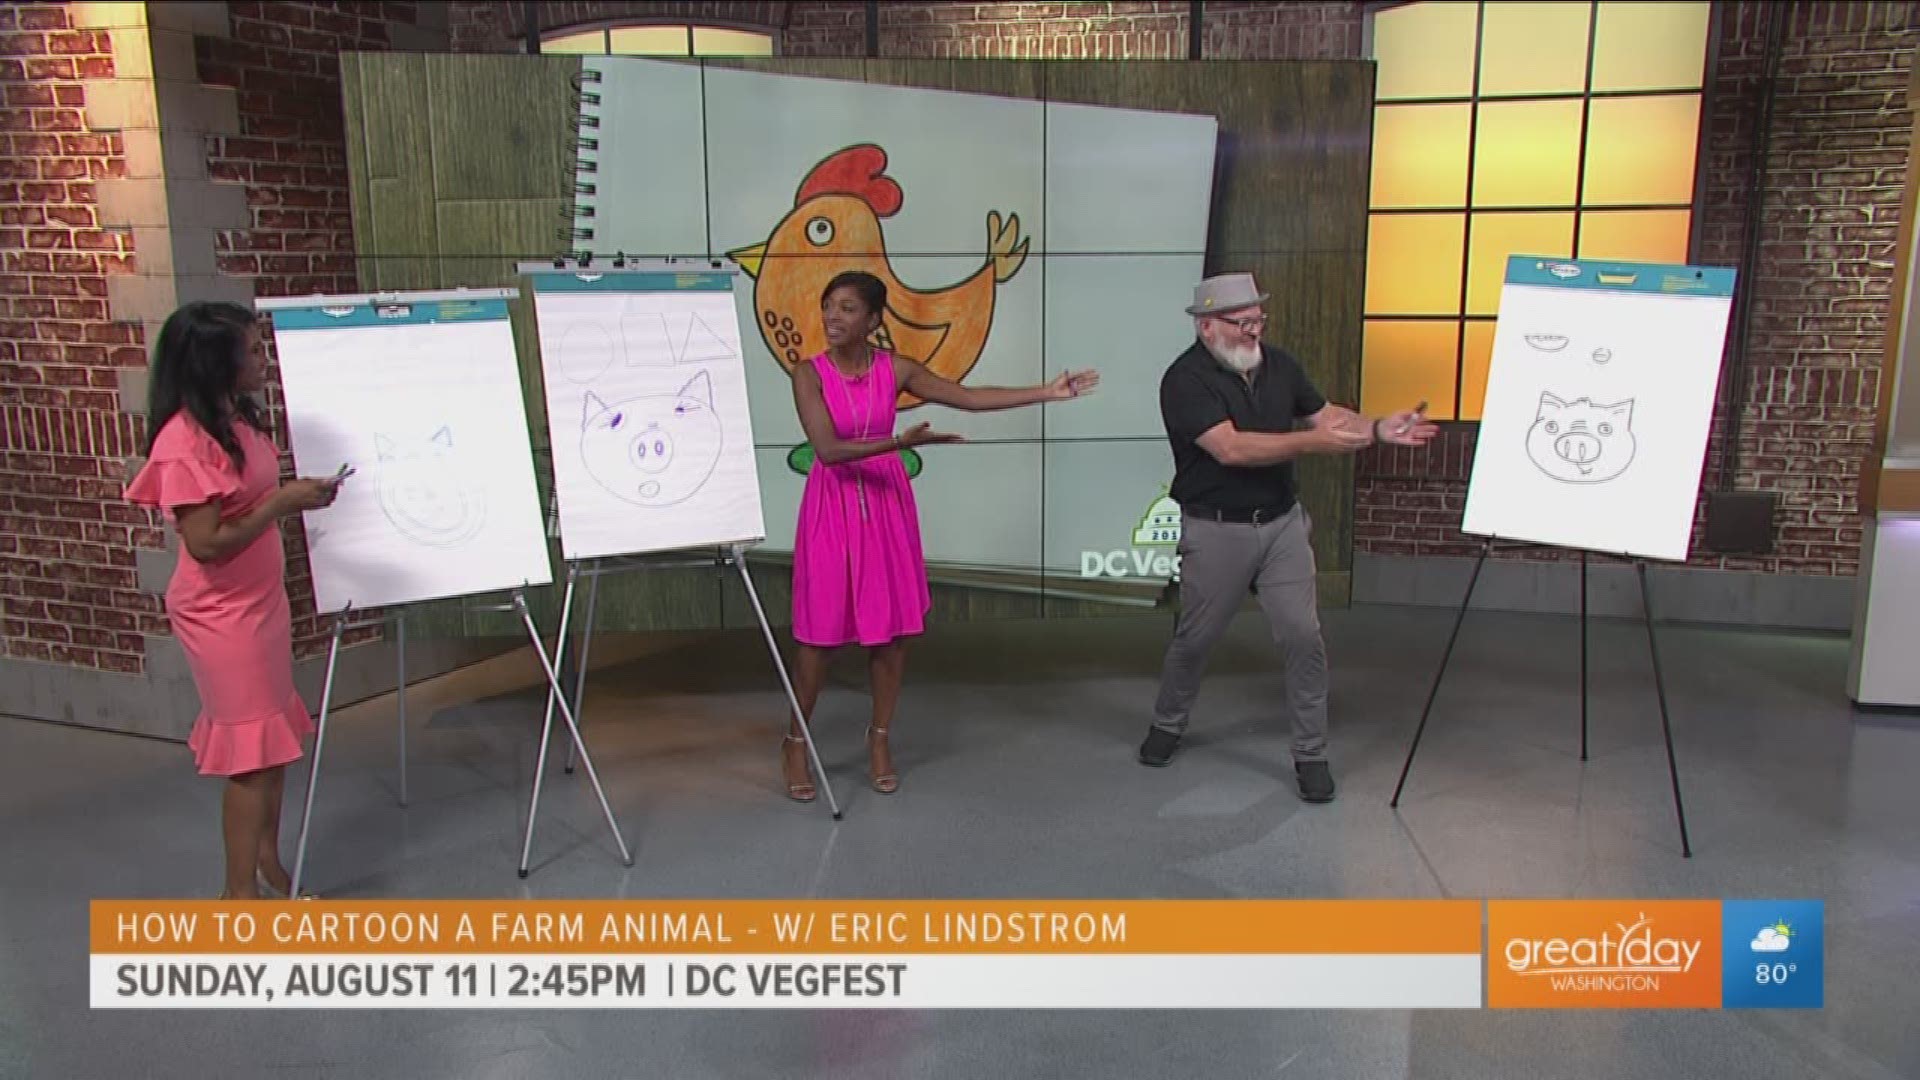 Eric Lindstrom stopped by the Great Day studio to show us how to draw a cartoon pig! Lindstrom will be at the DC Vegfest with fun activities like this and more at the Kids Zone this Sunday, Aug. 11, 2019. To learn more about the festival, visit dcvegfest.com